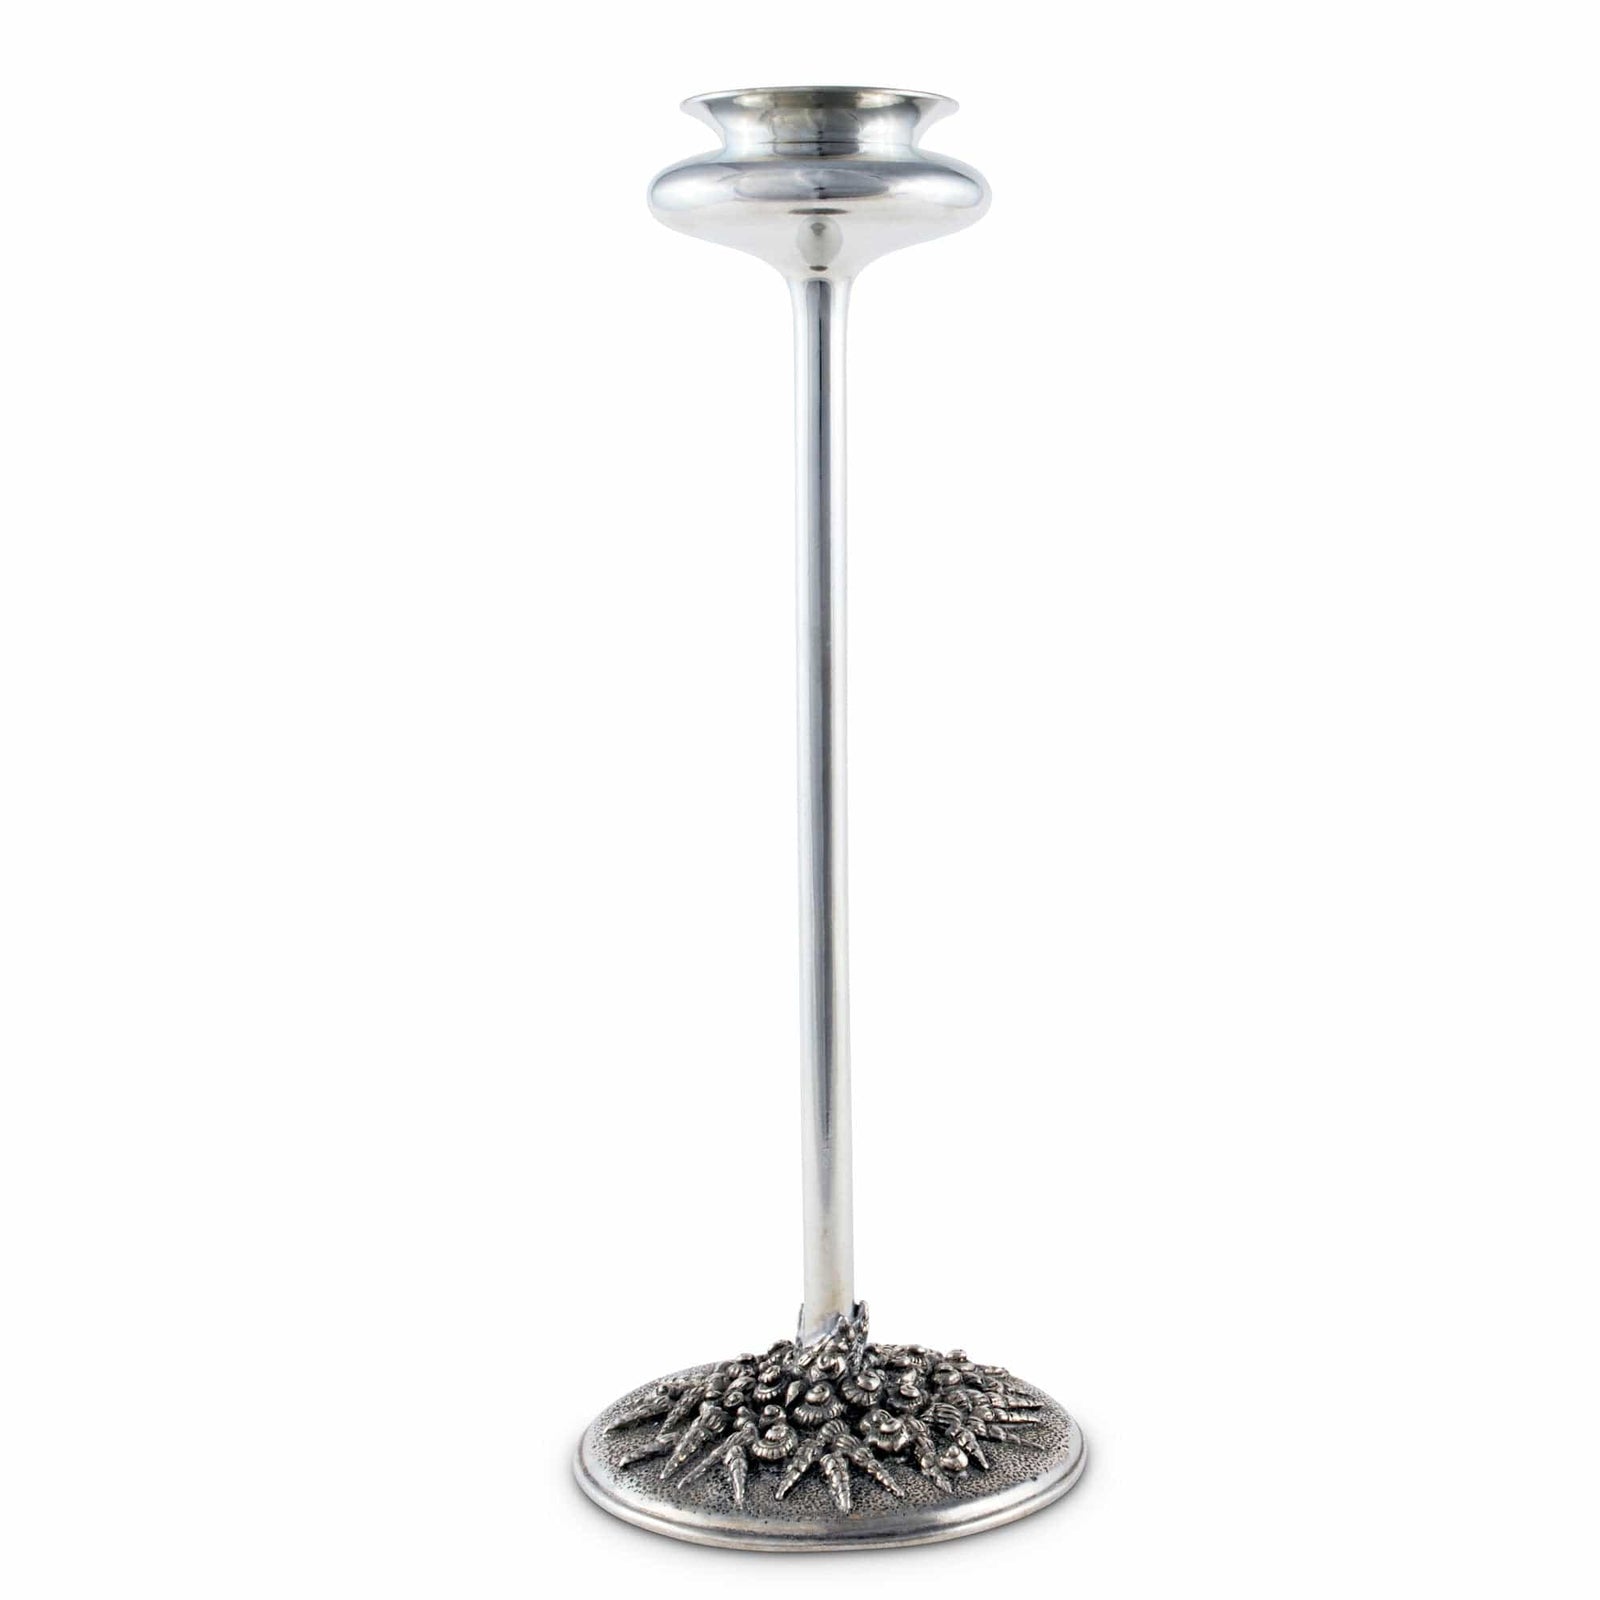 Vagabond House Pewter Winter Berry Candlestick Tall 11.5 inch Tall